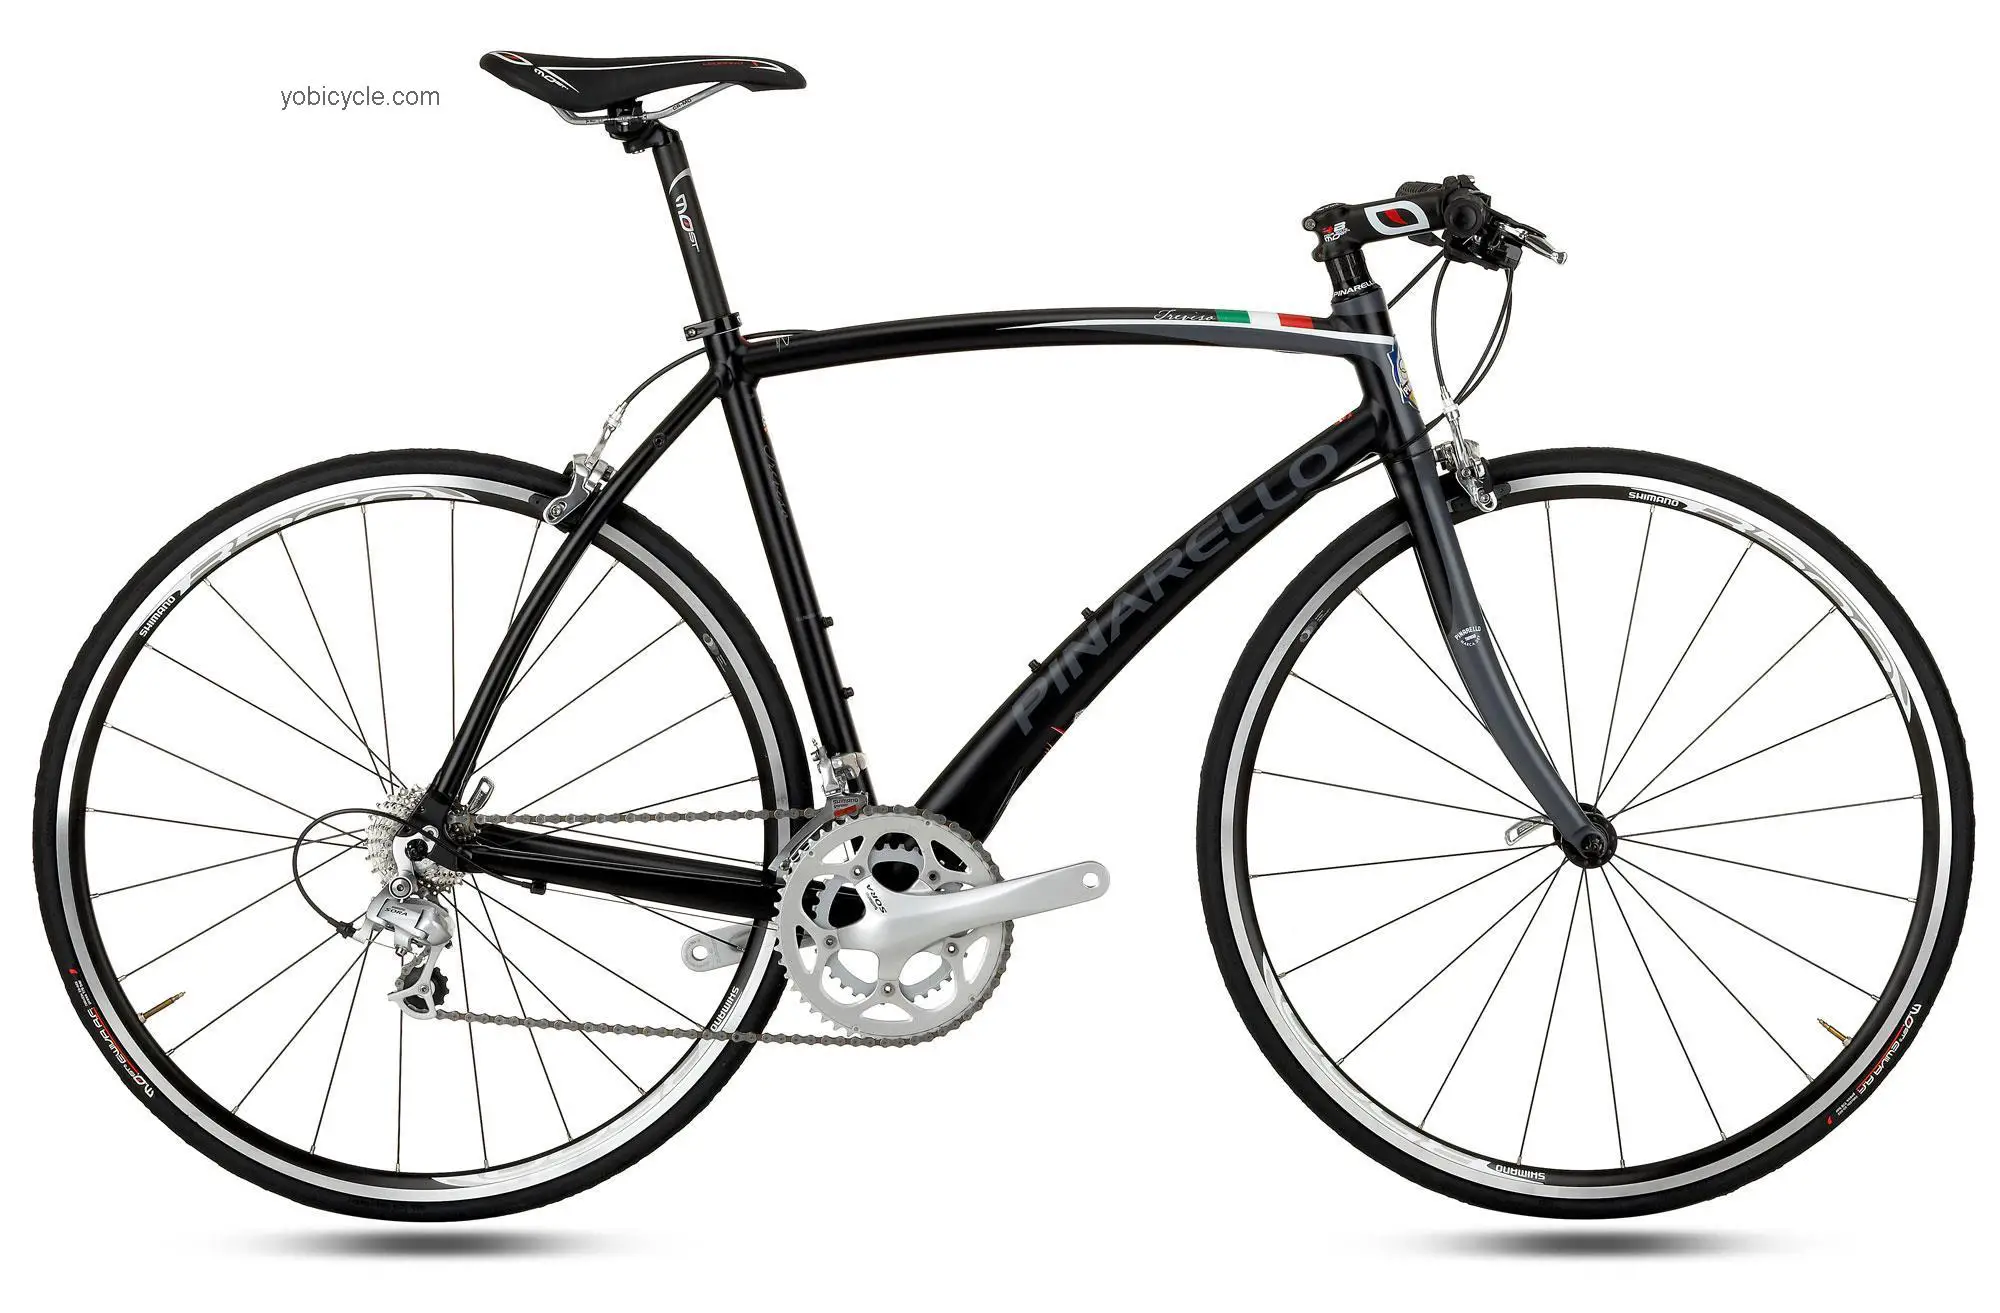 Pinarello Treviso competitors and comparison tool online specs and performance